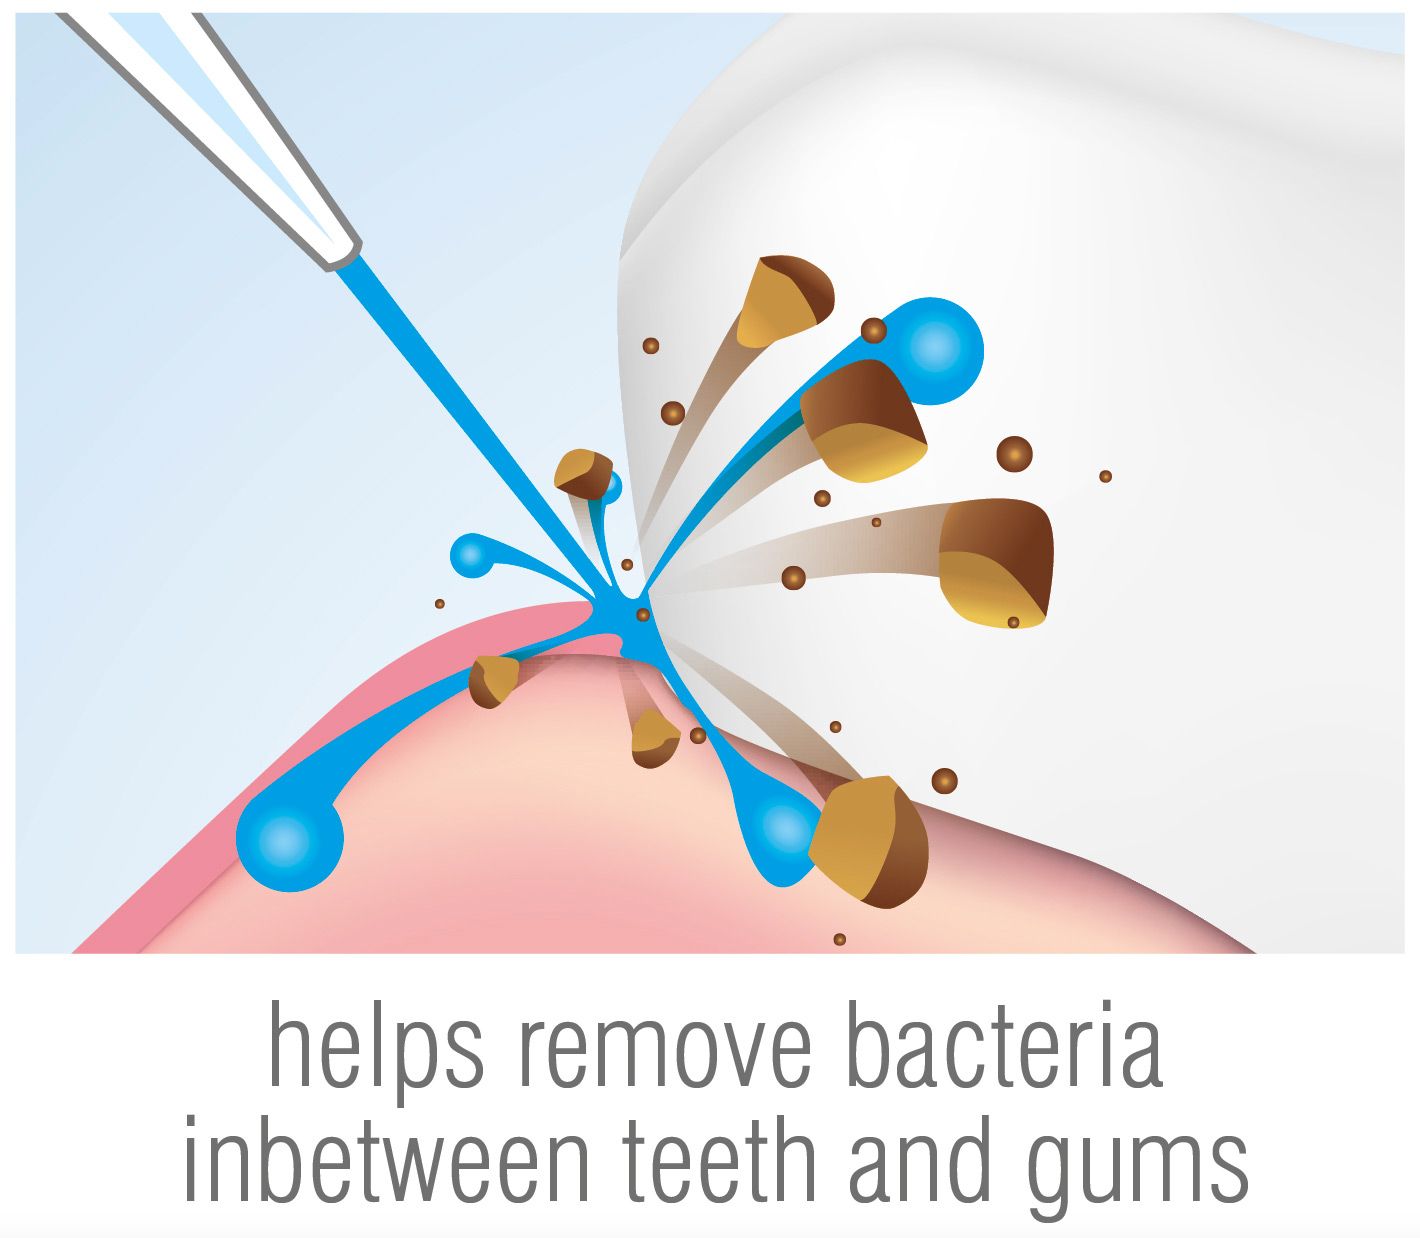 illustration of oral irrigator removing debris from the gum line captioned 'helps remove bacteria inbetween teeth and gums'